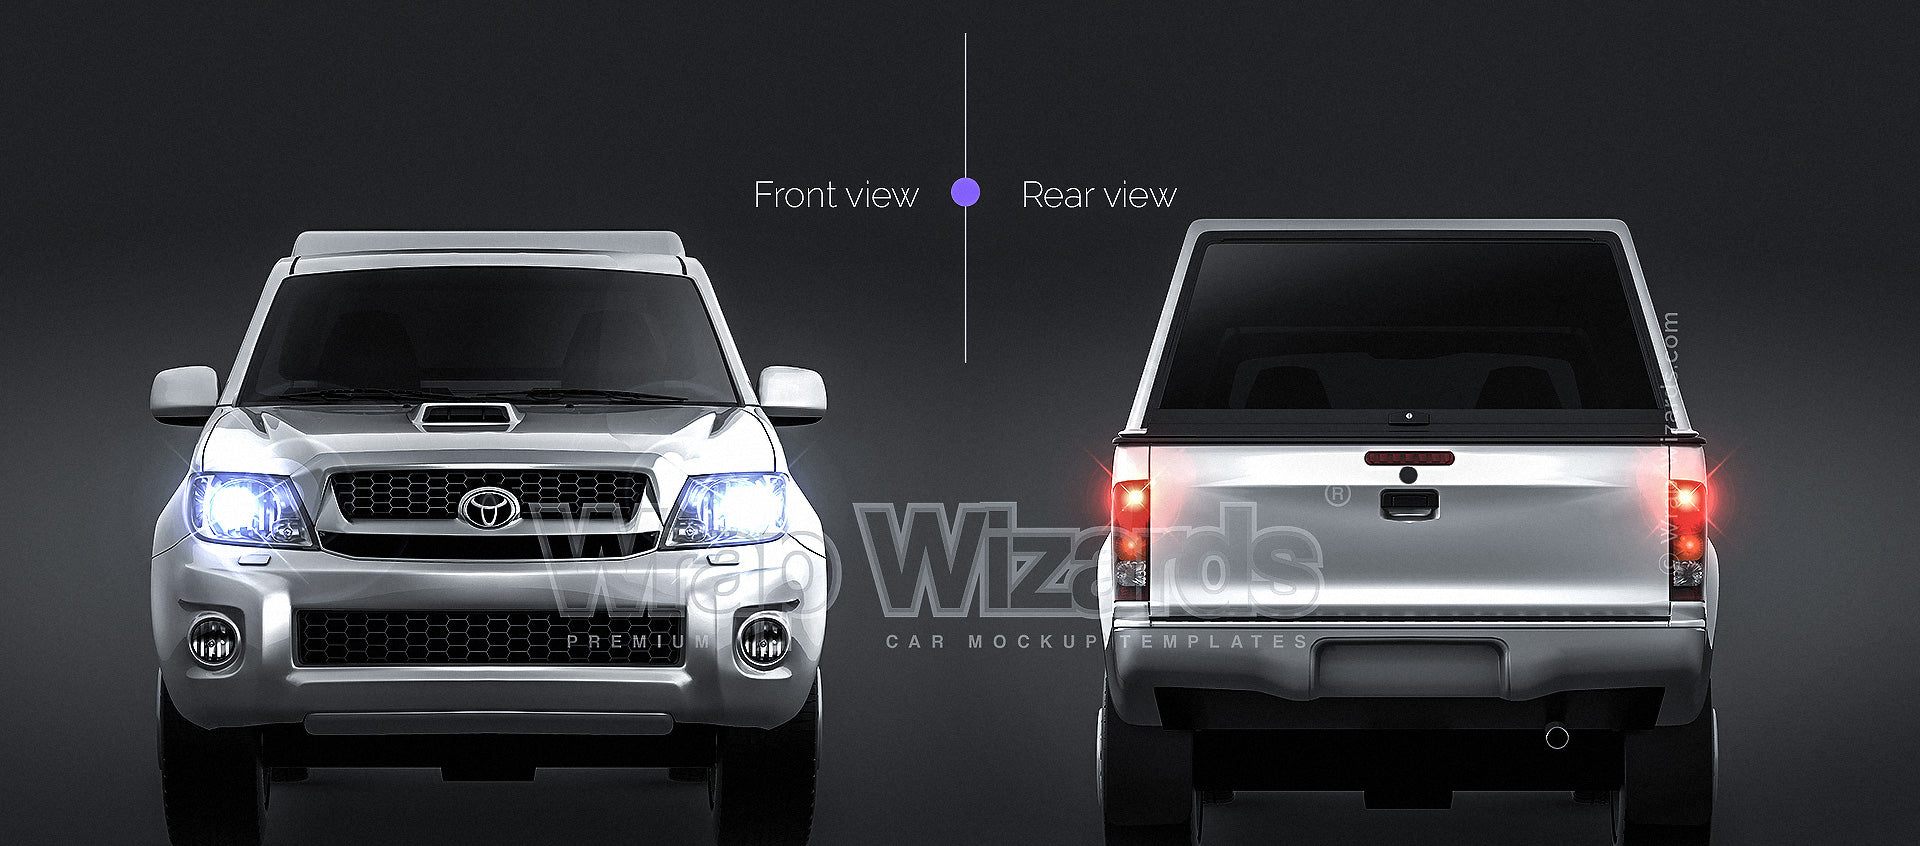 Toyota Hilux Single Cab 2009 glossy finish - all sides Car Mockup Template.psd